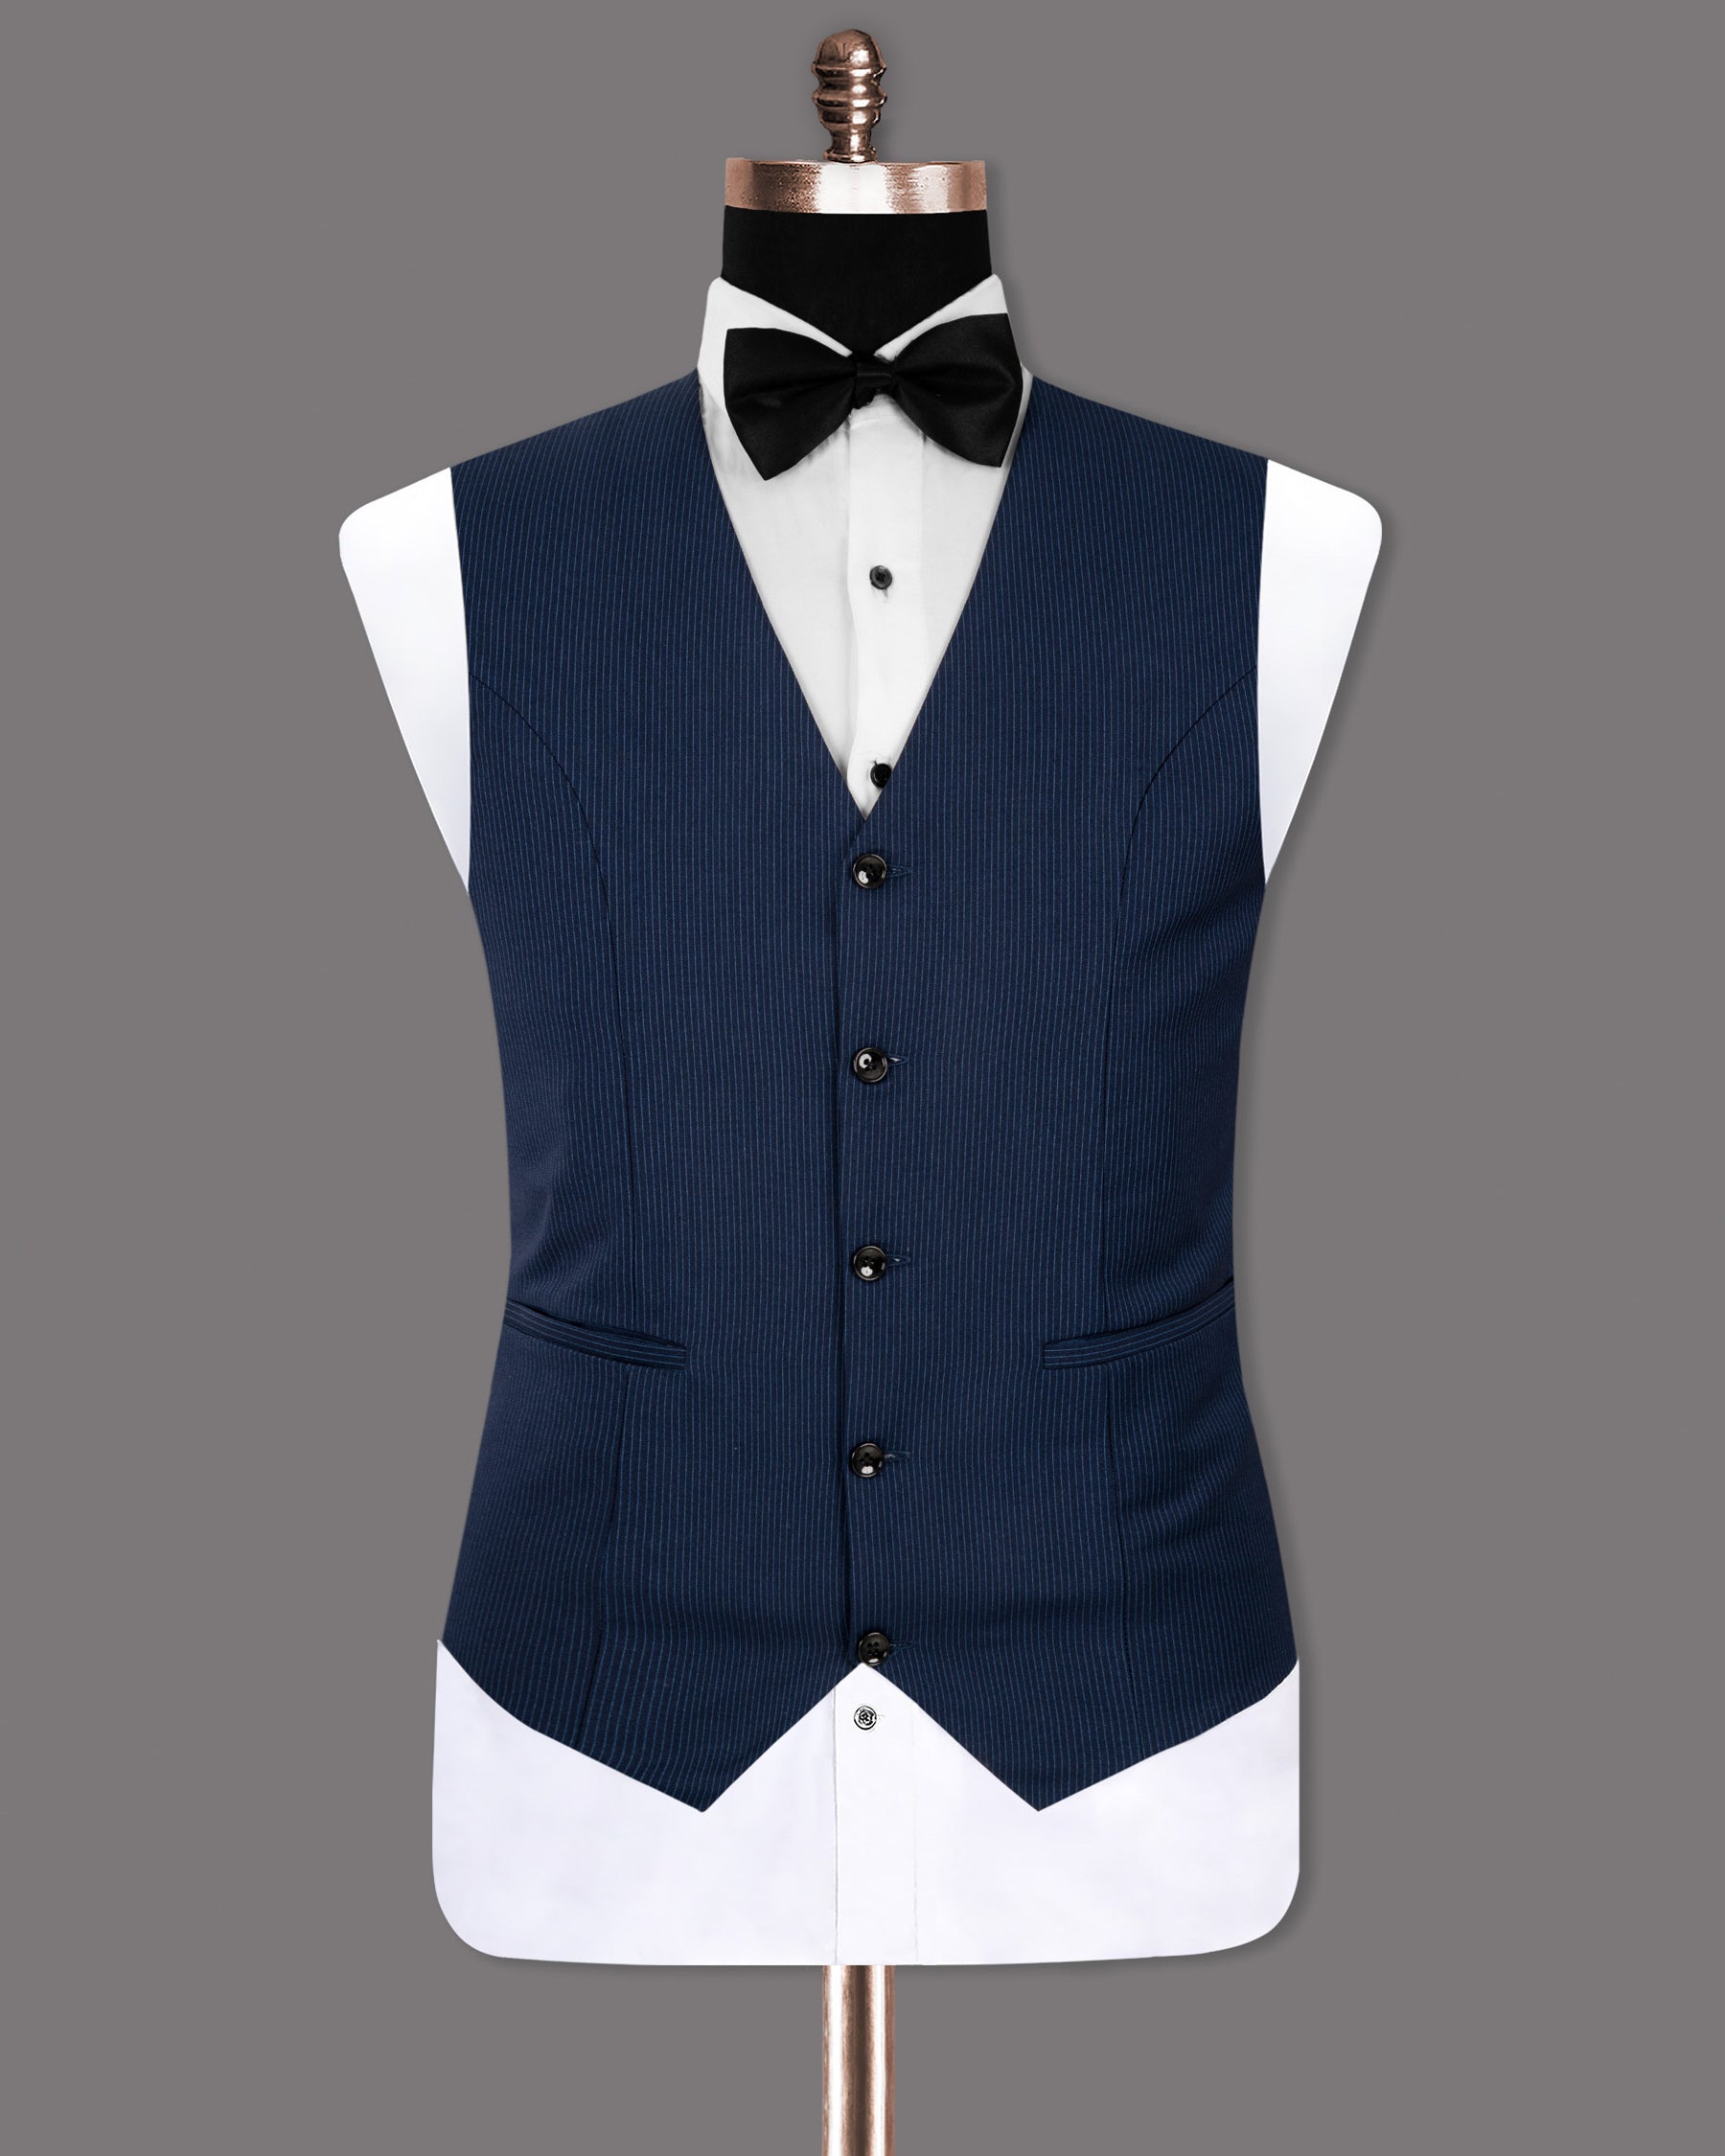 Midnight and Chambray blue Striped Woolrich Waistcoat V1272-38, V1272-42, V1272-44, V1272-48, V1272-50, V1272-54, V1272-56, V1272-58, V1272-60, V1272-36, V1272-40, V1272-46, V1272-52